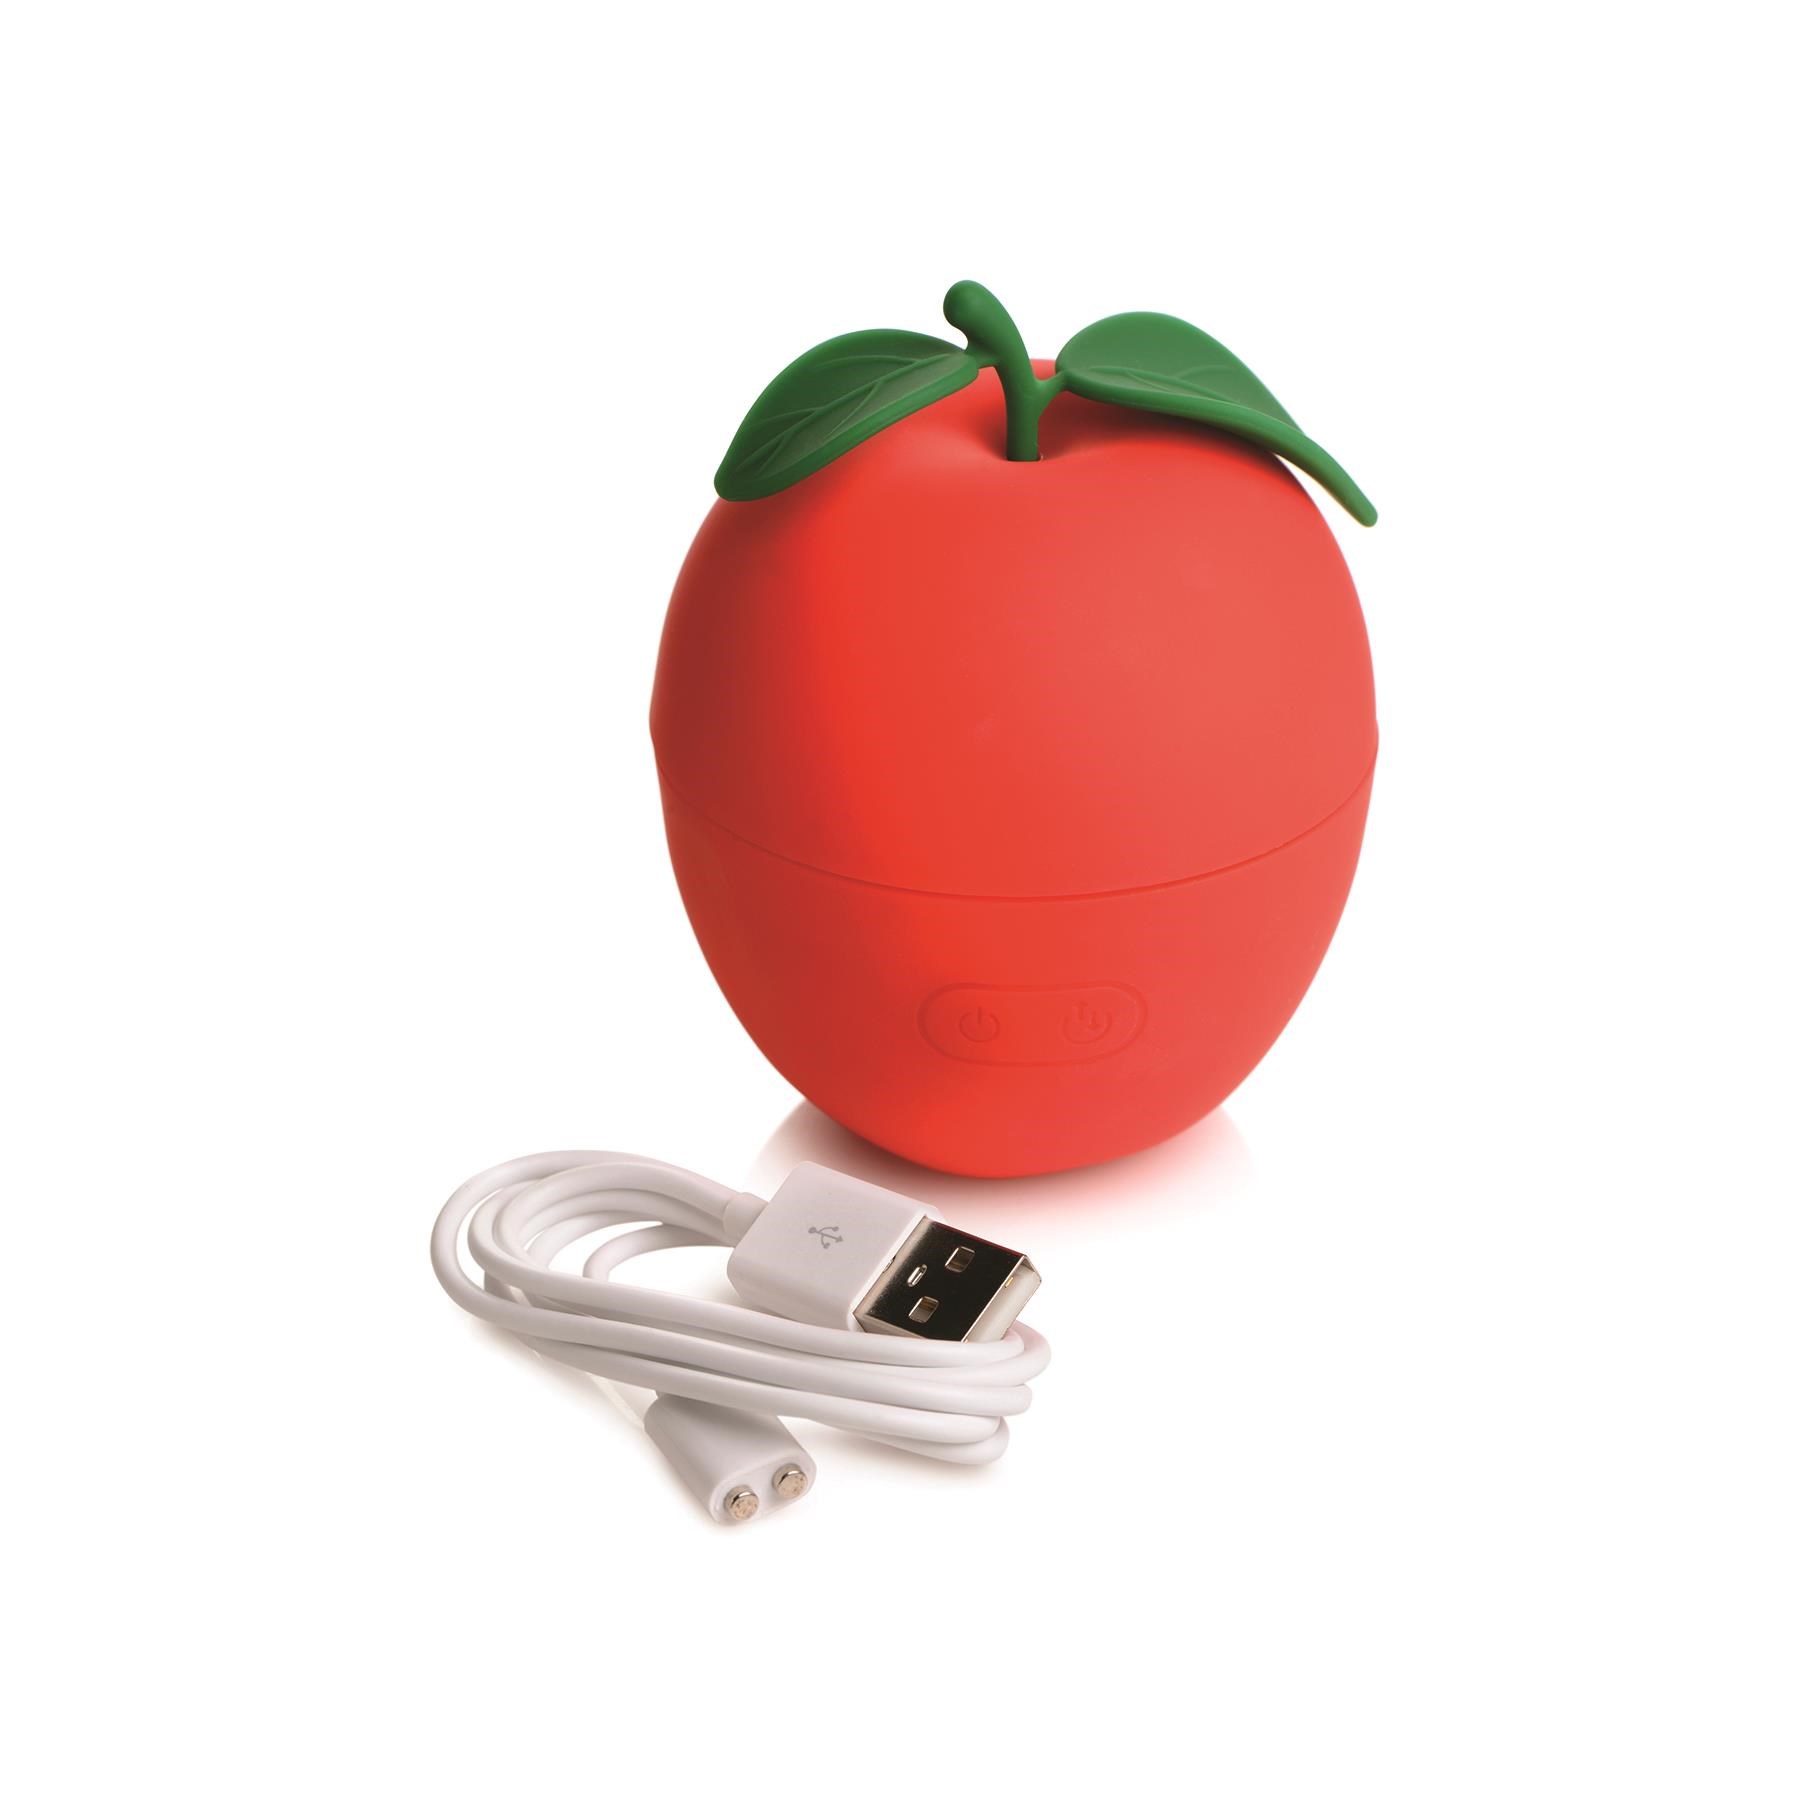 Shegasm Forbidden Apple Clitoral Stimulator - Product and Charging Cable